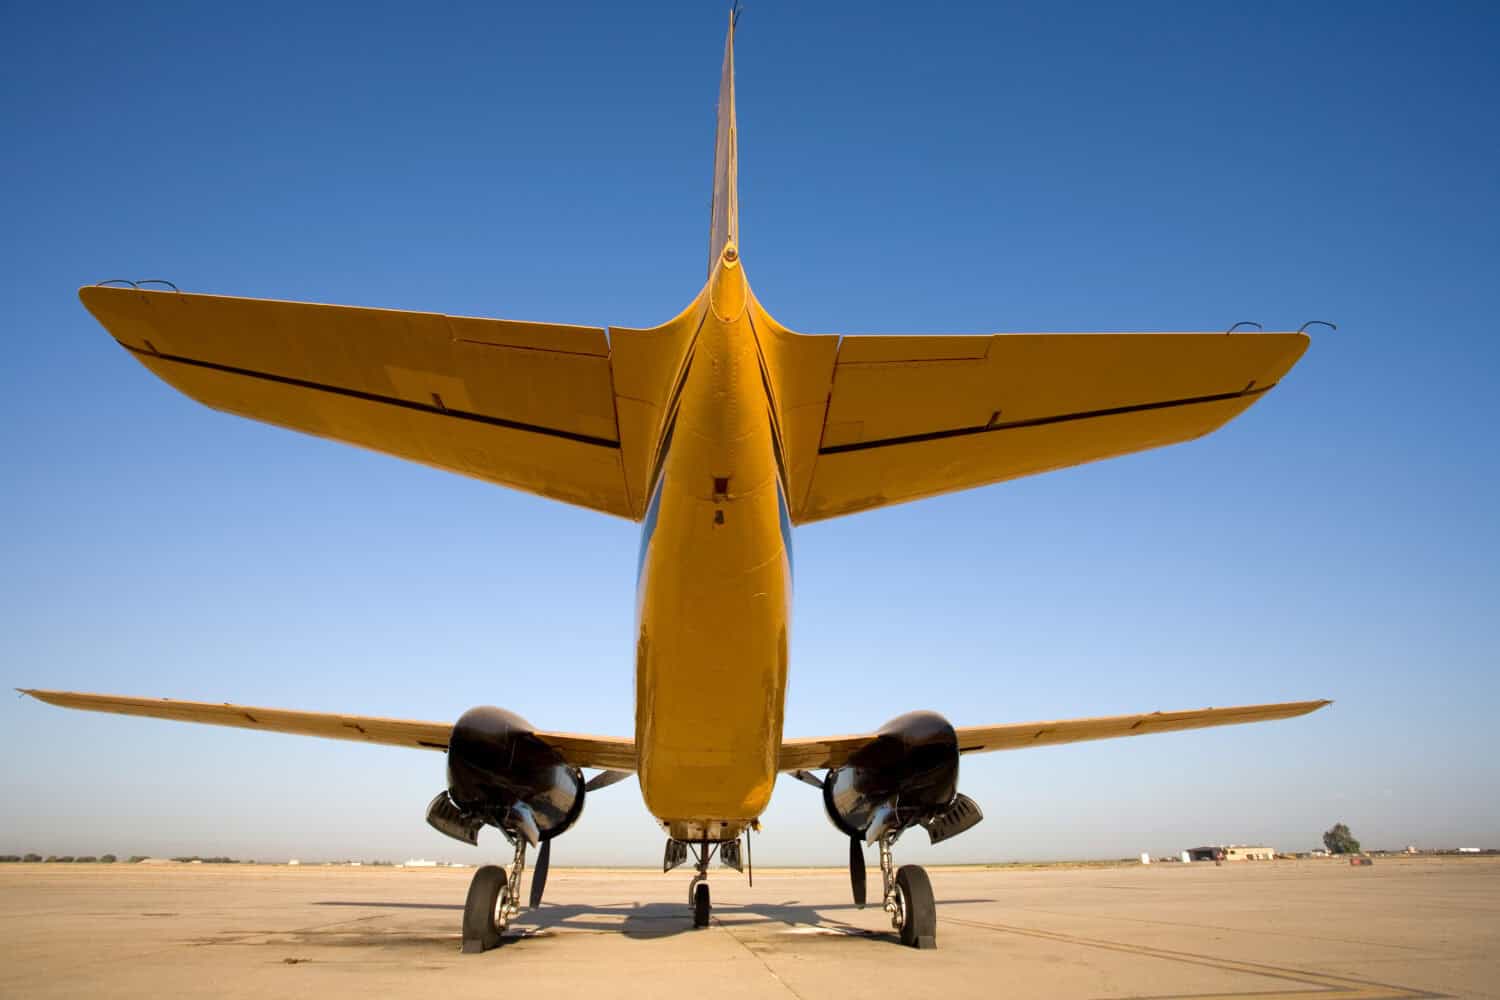 This twin engined airplane started life during World War II as the Douglas A-26C Invader and later fought forest fires